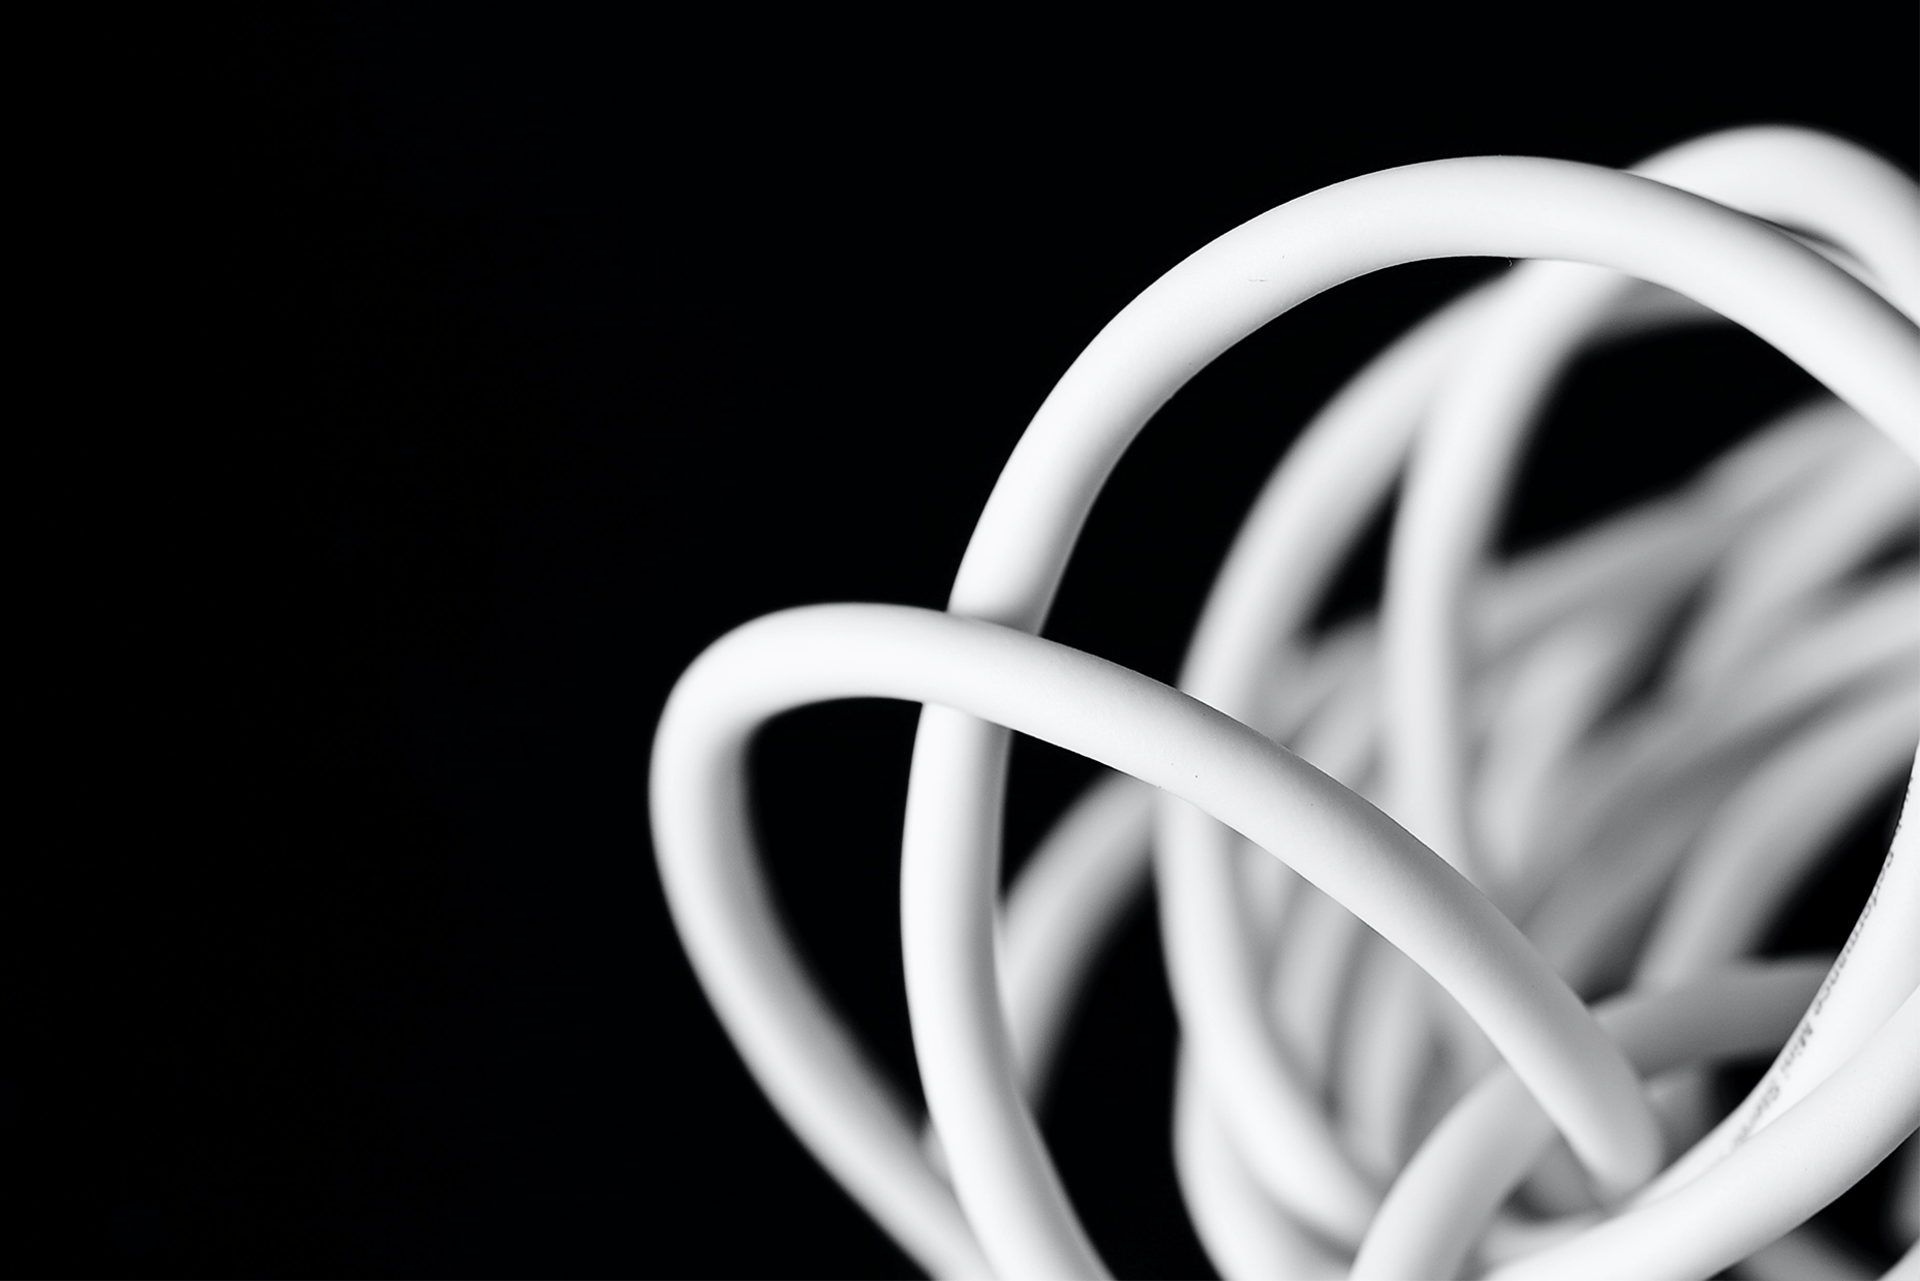 Knotted cables